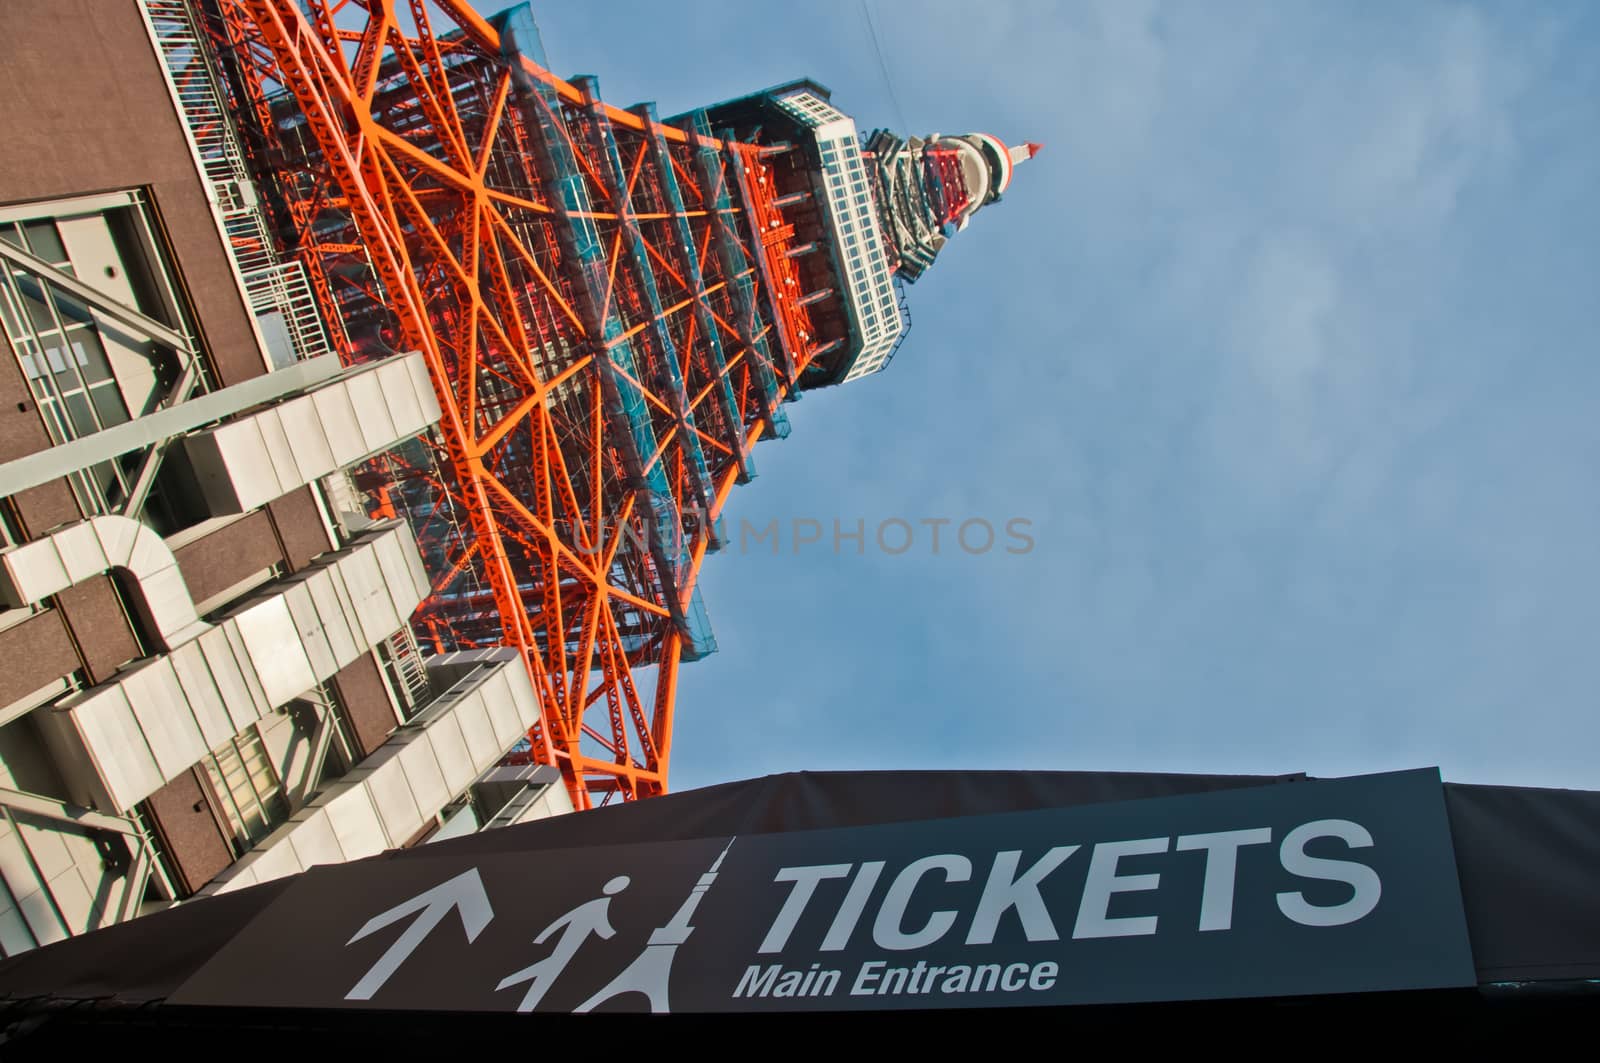 TOKYO, JAPAN - DECEMBER 1, 2018: Main entrance to buy tickets of famous Tokyo Tower situates in the central Tokyo in the morning. The tower is a communications and observation tower with around 330 metres tall and was built in 1958. There is nobody in the photo.